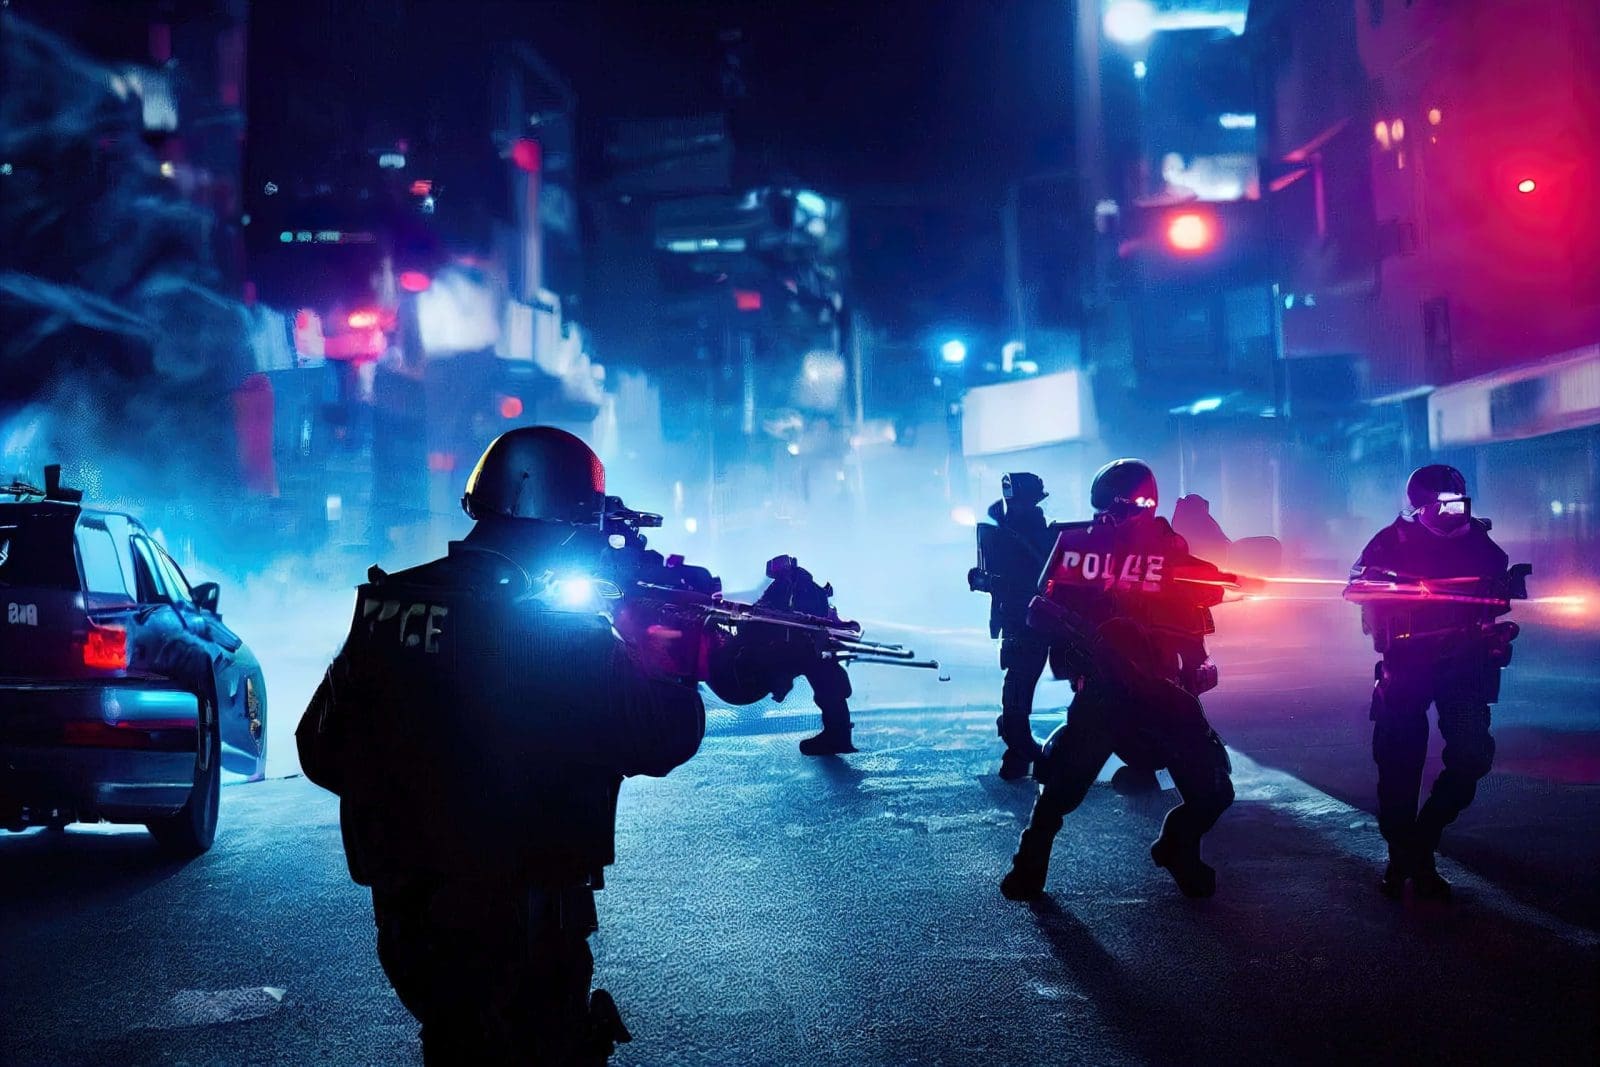 Police in tactical gear moving through a smoke-filled street at night, using AI-enhanced visual analytics for law enforcement operations.